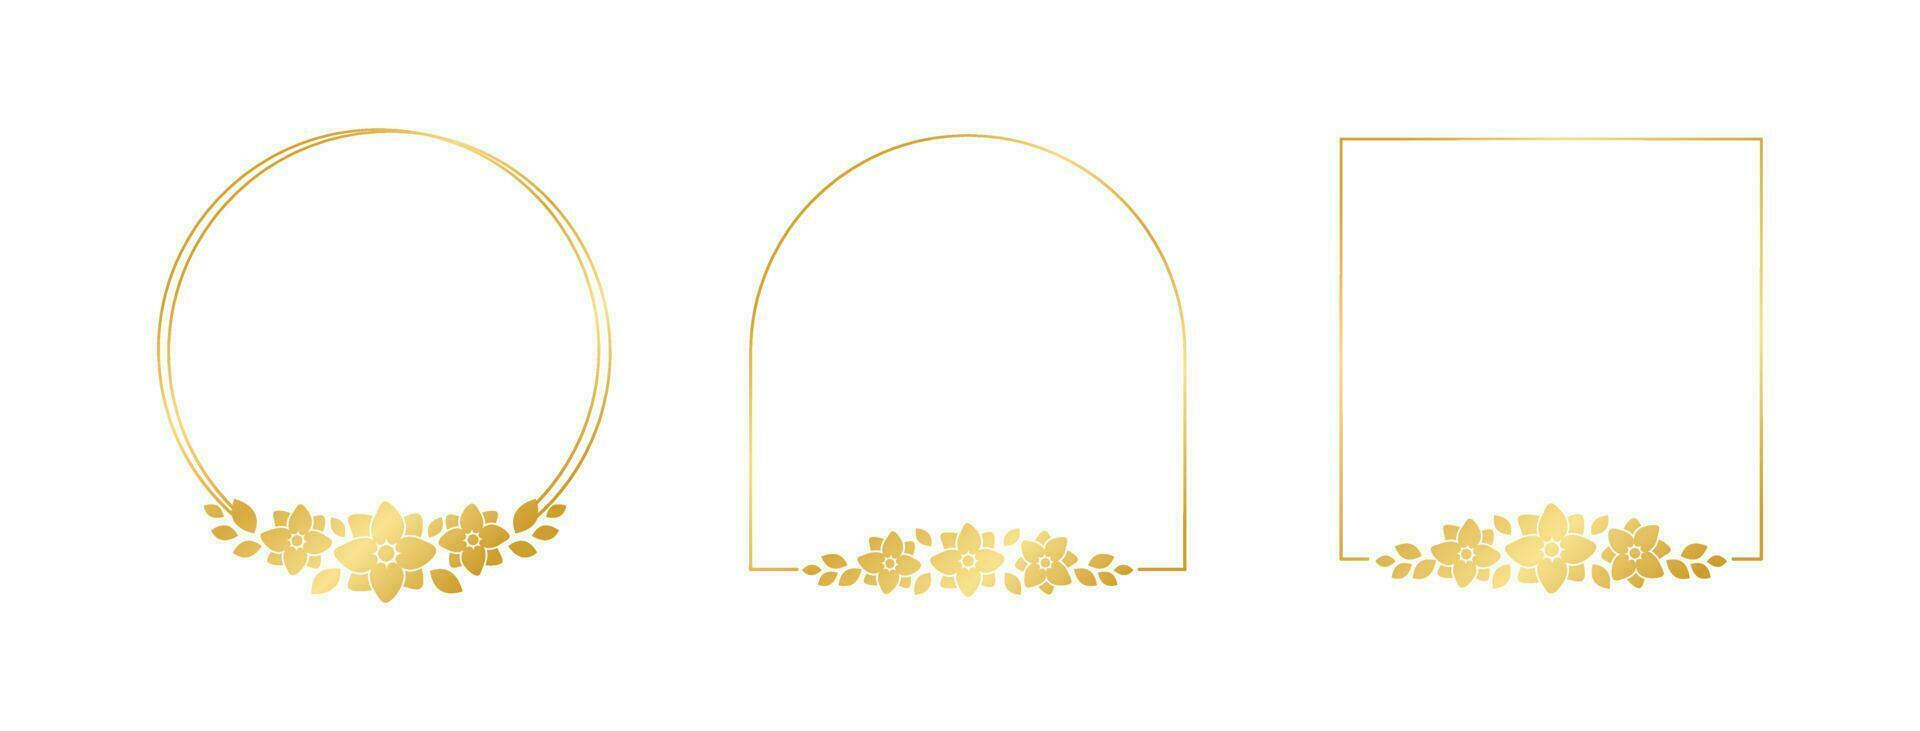 Gold geometric floral frame template set. Luxury golden frame border for invite, wedding, certificate. Vector art with flowers and leaves.